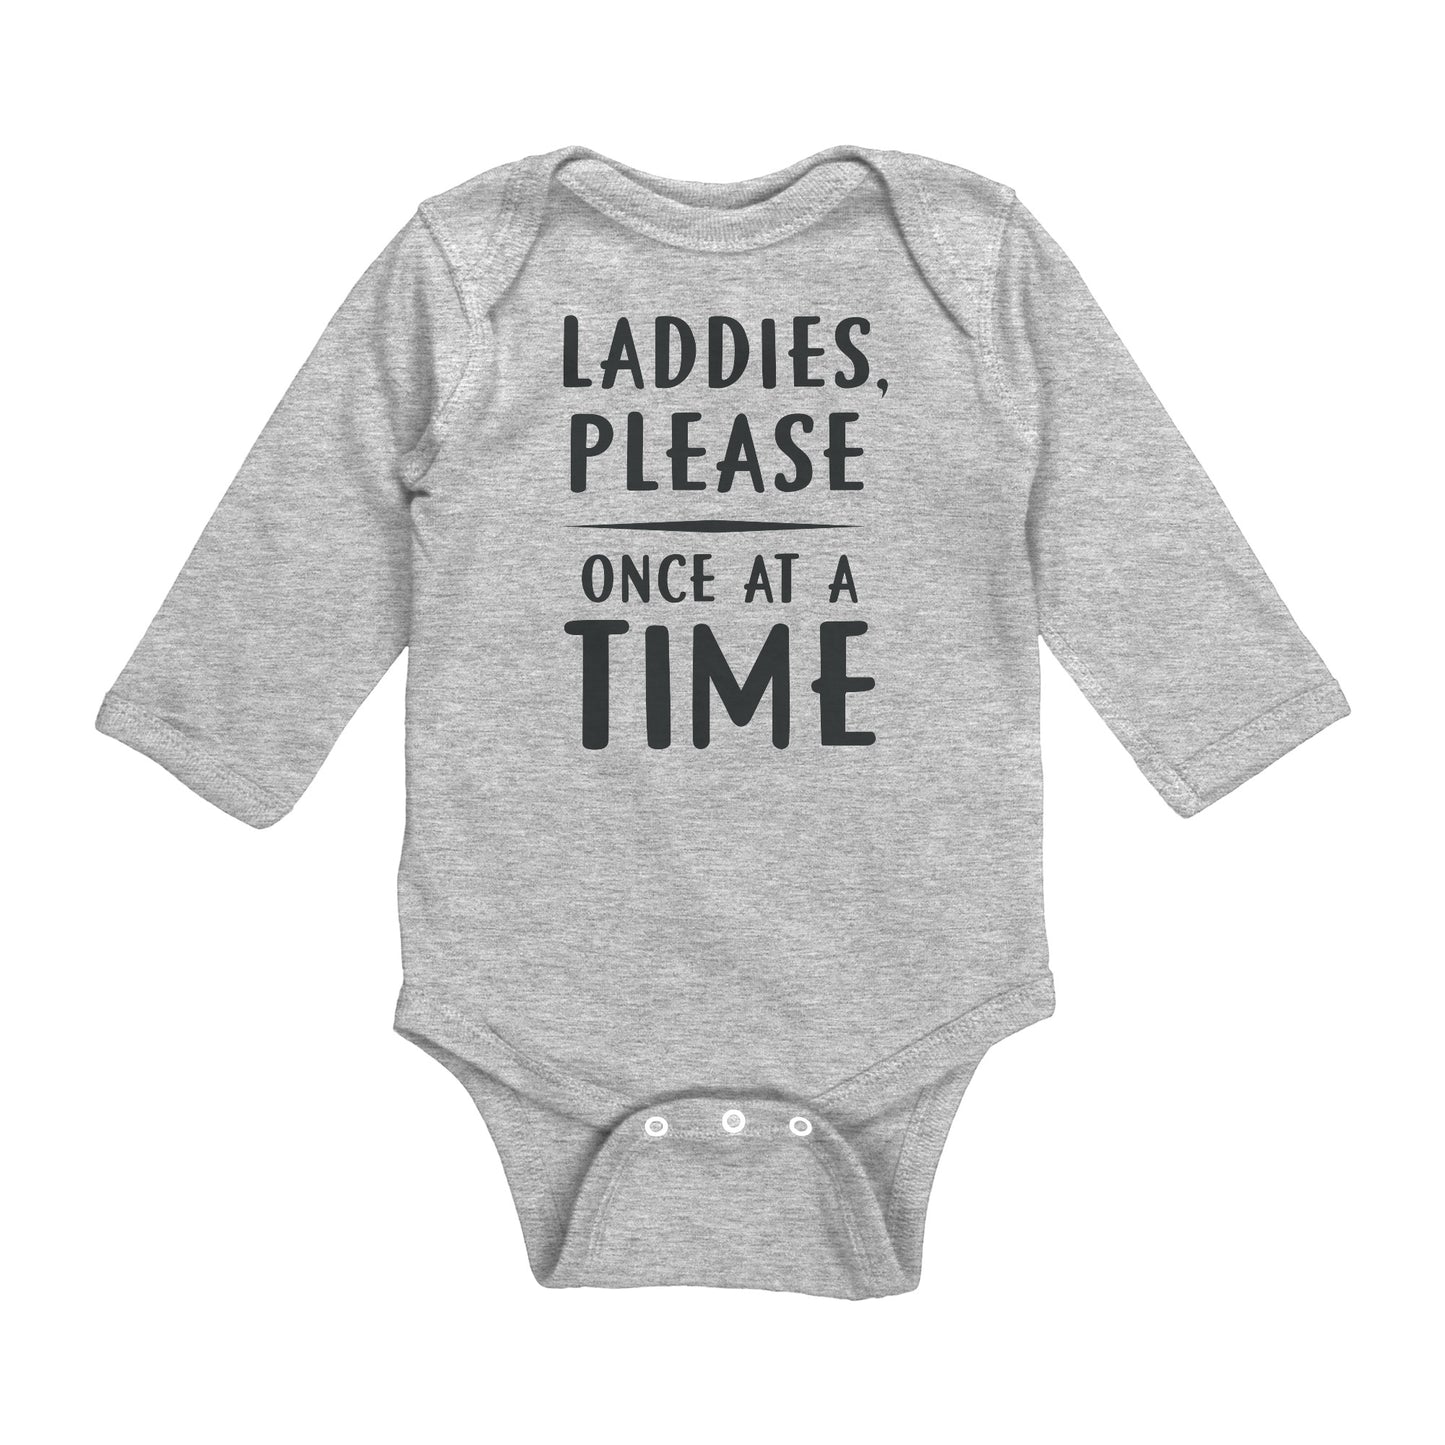 Once At A Time - Infant Bodysuits